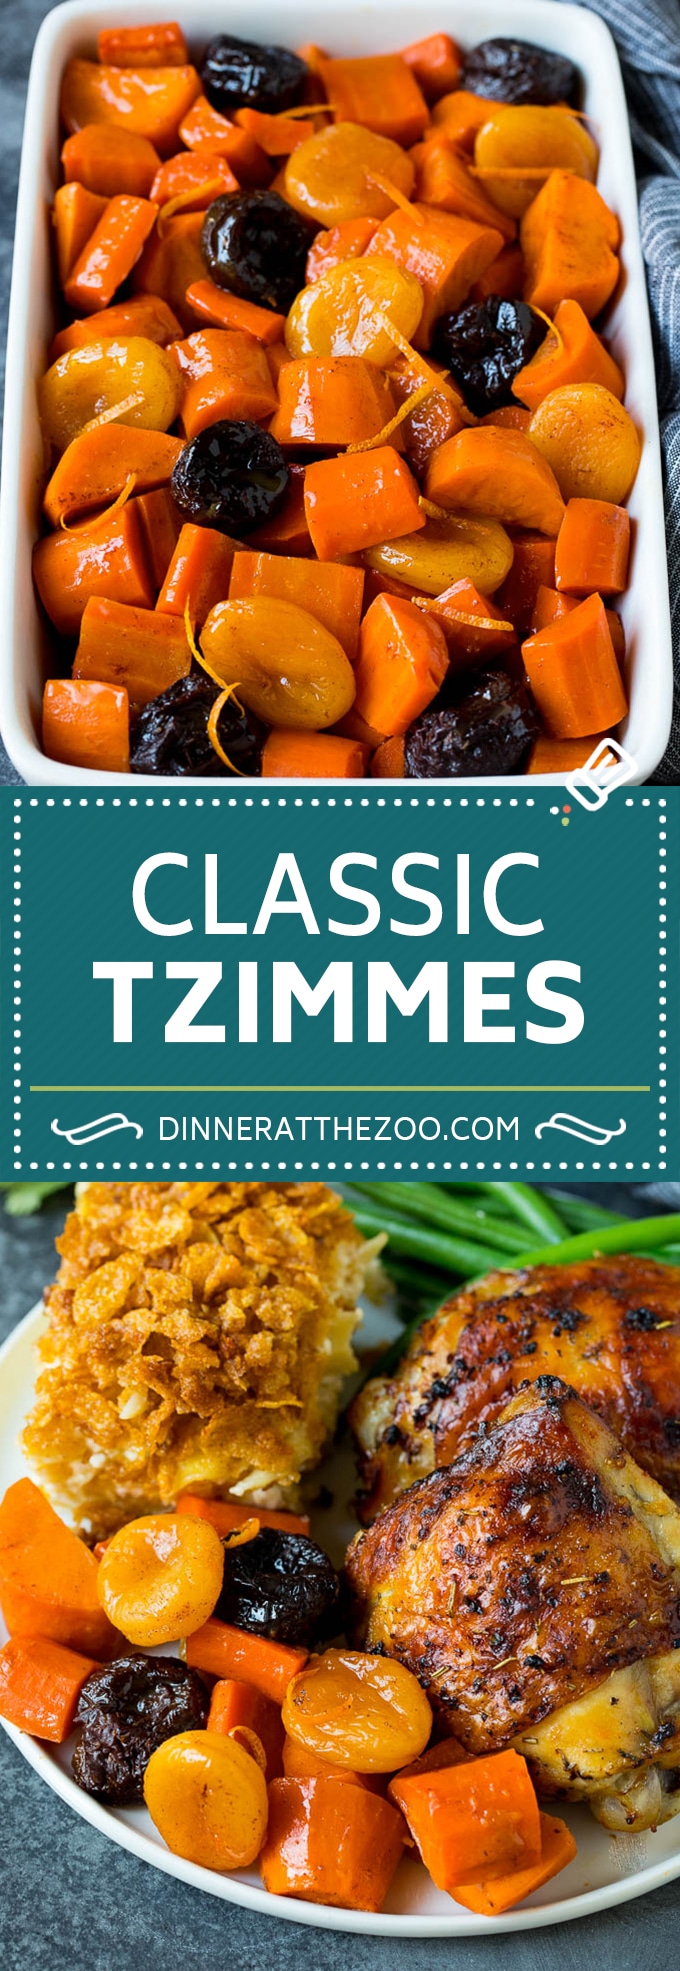 This tzimmes recipe is a colorful stew made with sweet potatoes, carrots and dried fruit.